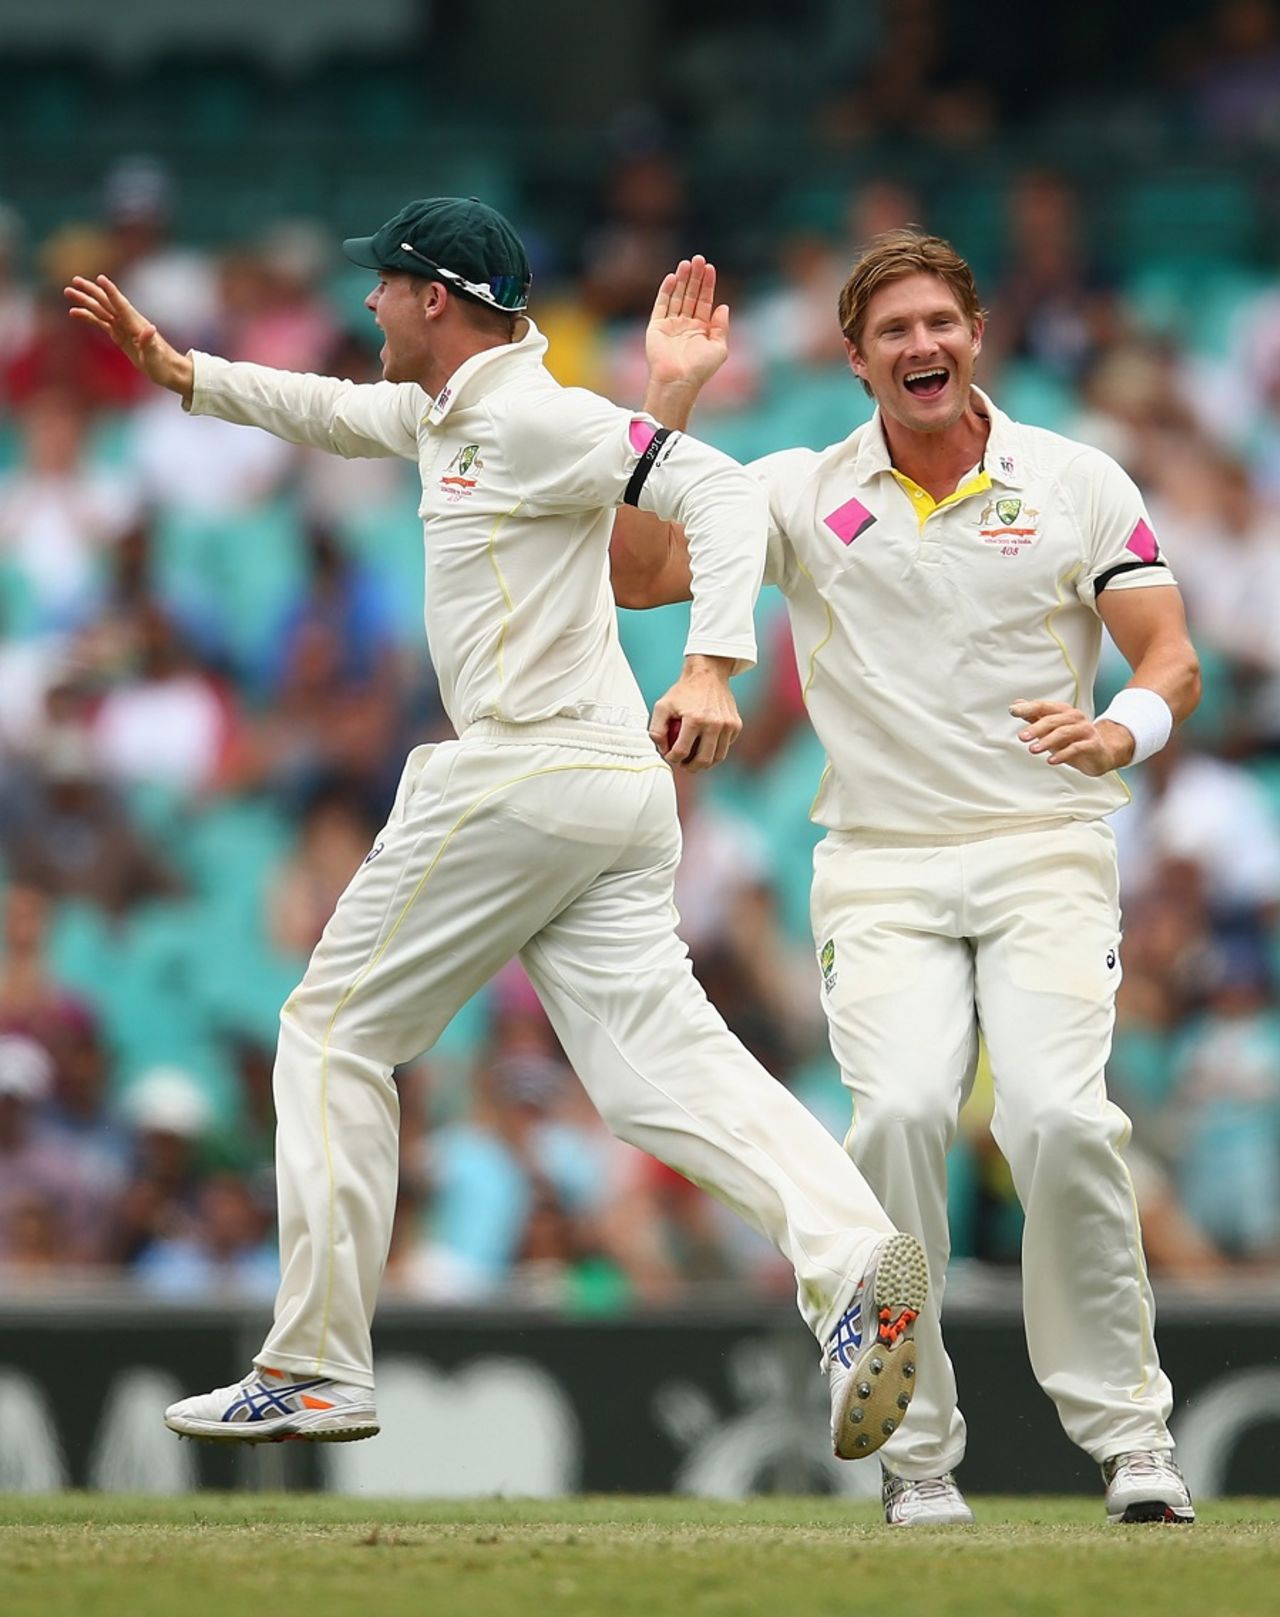 Steven Smith pulled off a stunner at first slip off Shane Watson's bowling, Australia v India, 4th Test, Sydney, 5th day, January 10, 2015